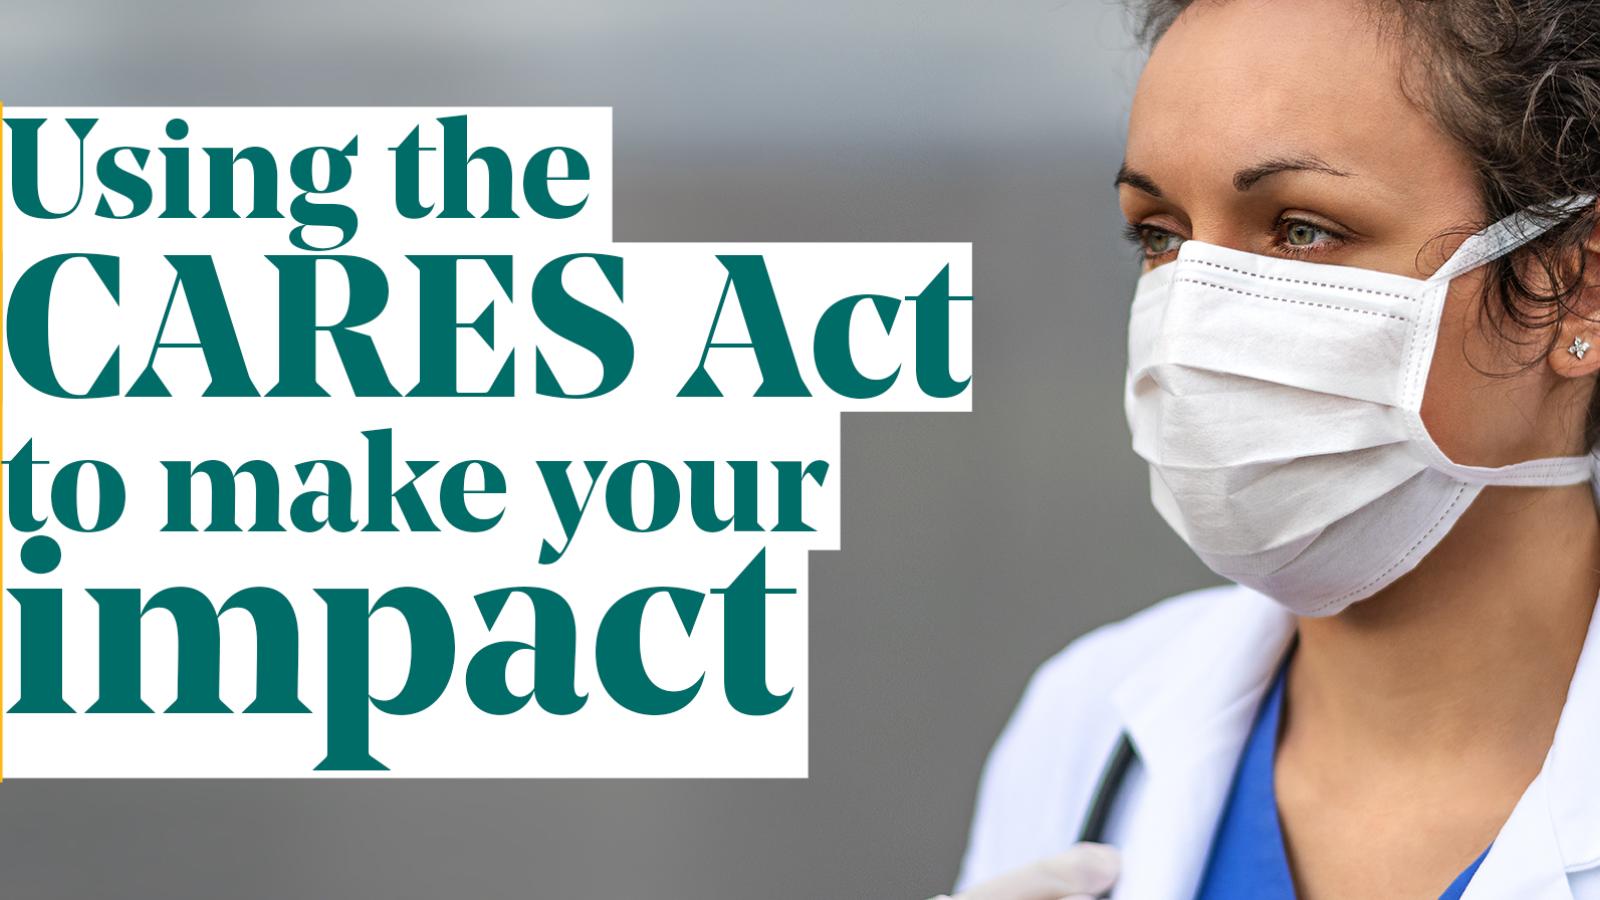 Doctor in PPE with text "using the cares act to make your impact"